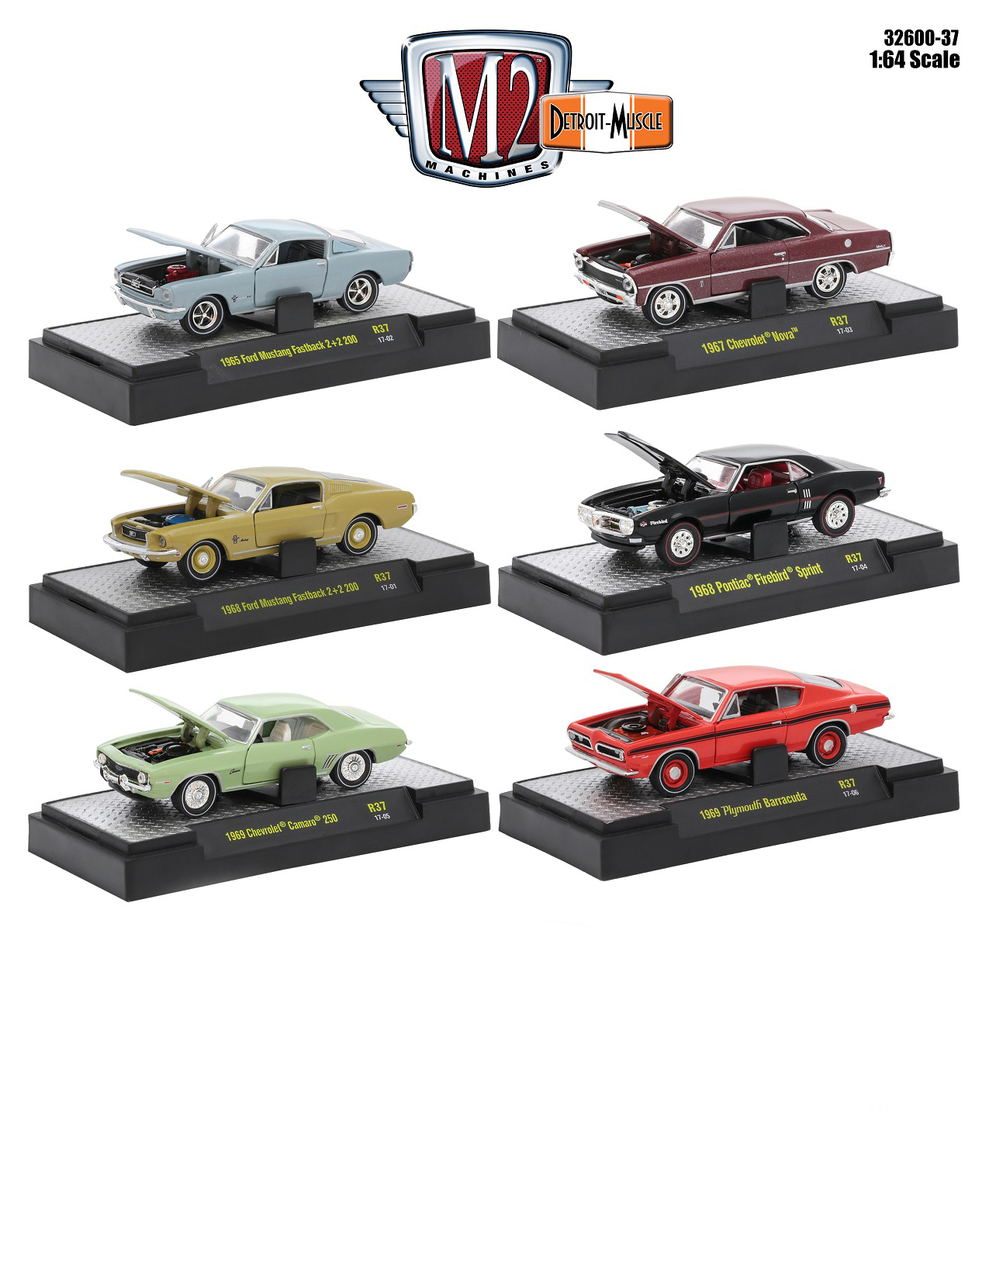 Detroit Muscle 6 Cars Set Release 37 In Display Cases 1/64 Diecast Model Cars By M2 Machines